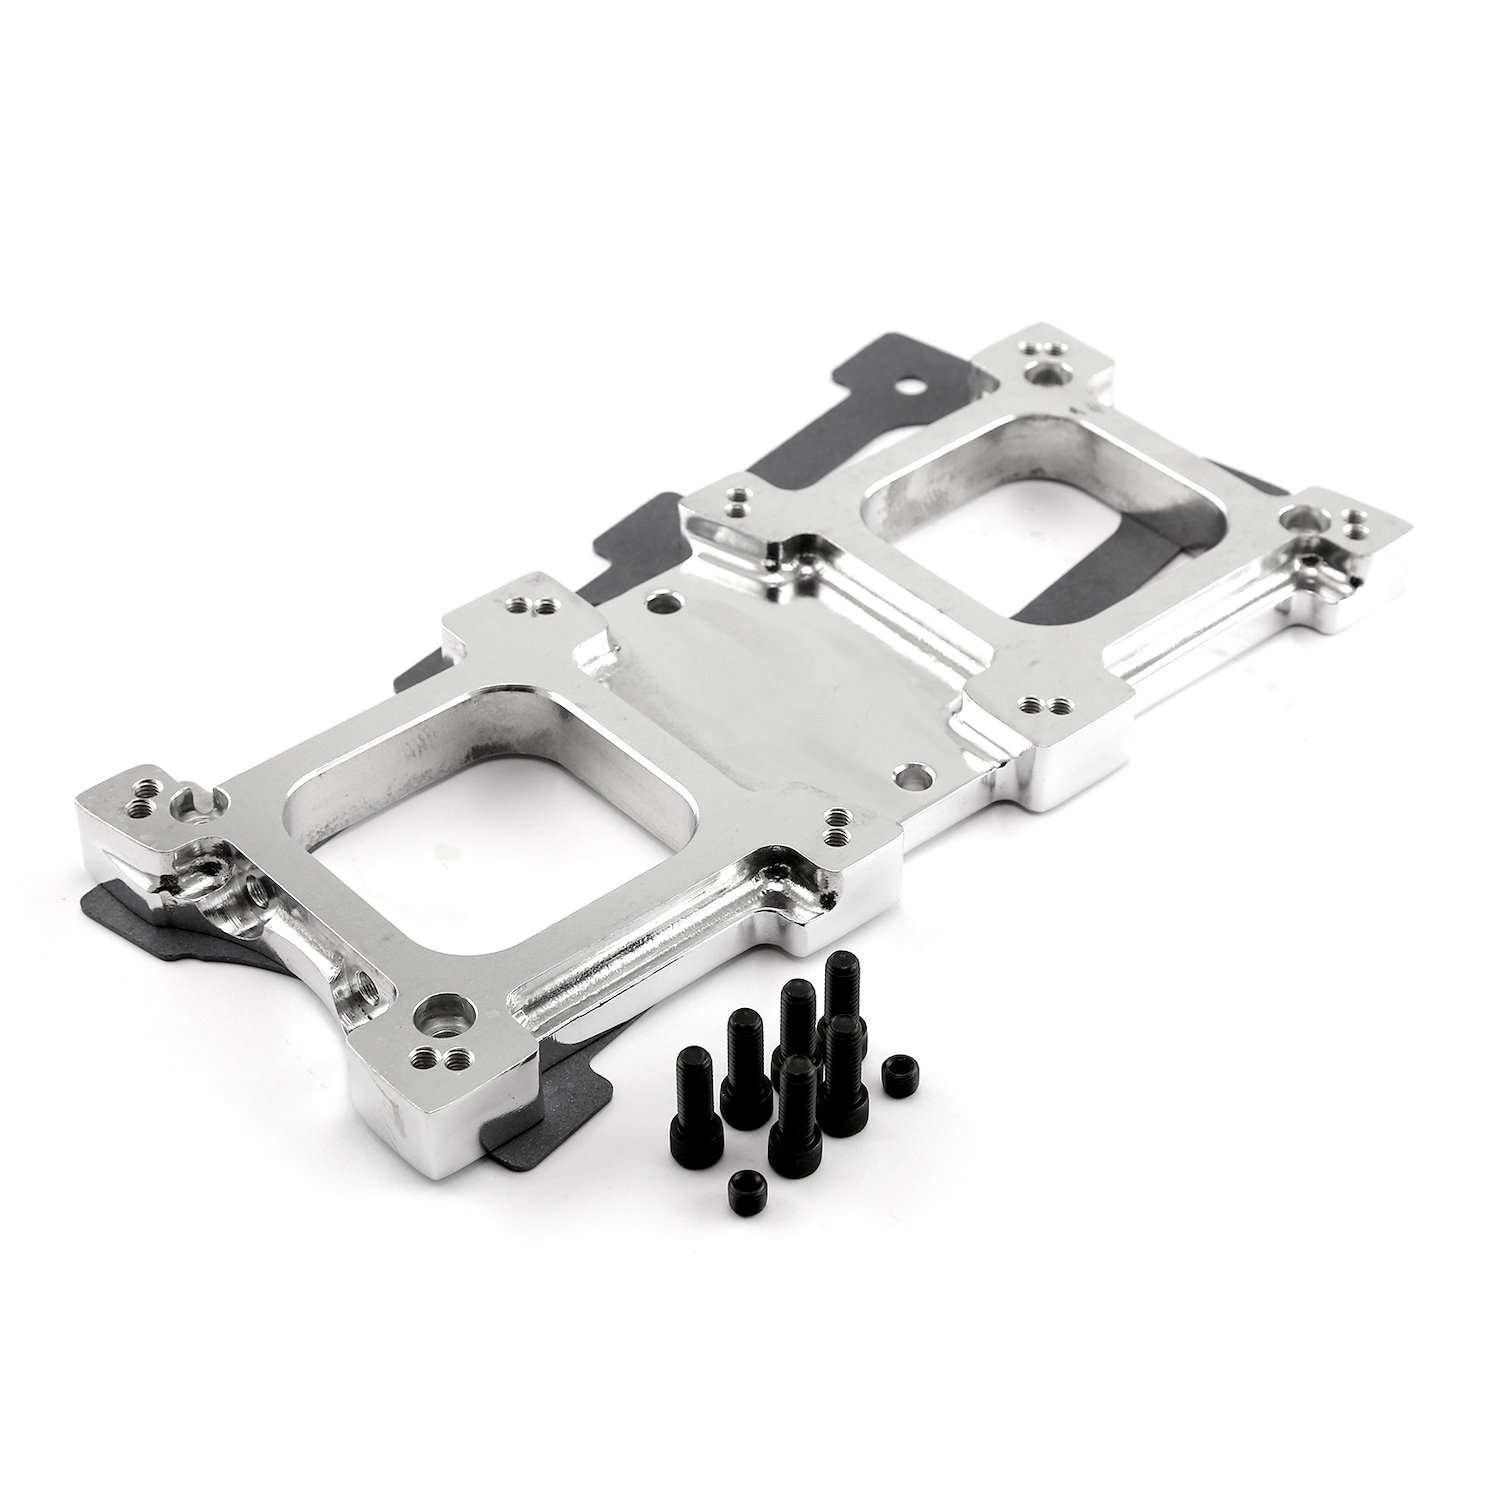 PCE156.1001.01 Dual 4150 Carburetor 1 in.  Aluminum Adapter Plate for GMC 6-71, 8-71 Roots-Style Superchargers [Polished]